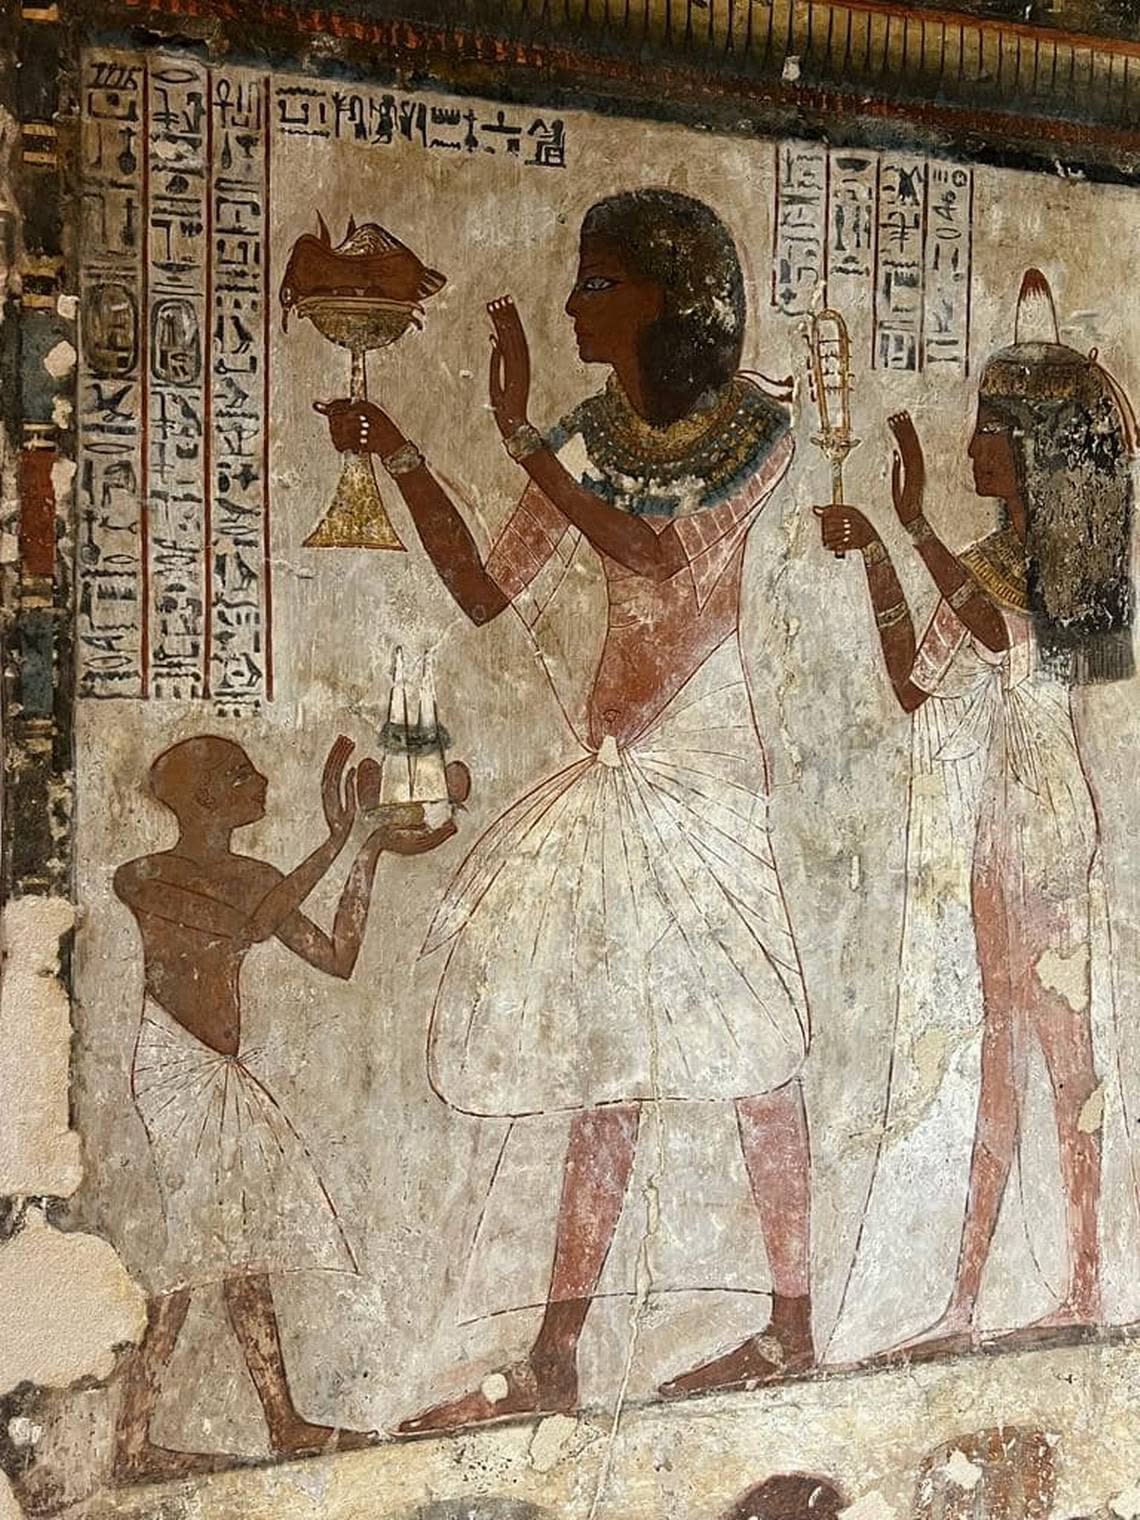 One of the restored paintings inside the tomb of Neferhotep.